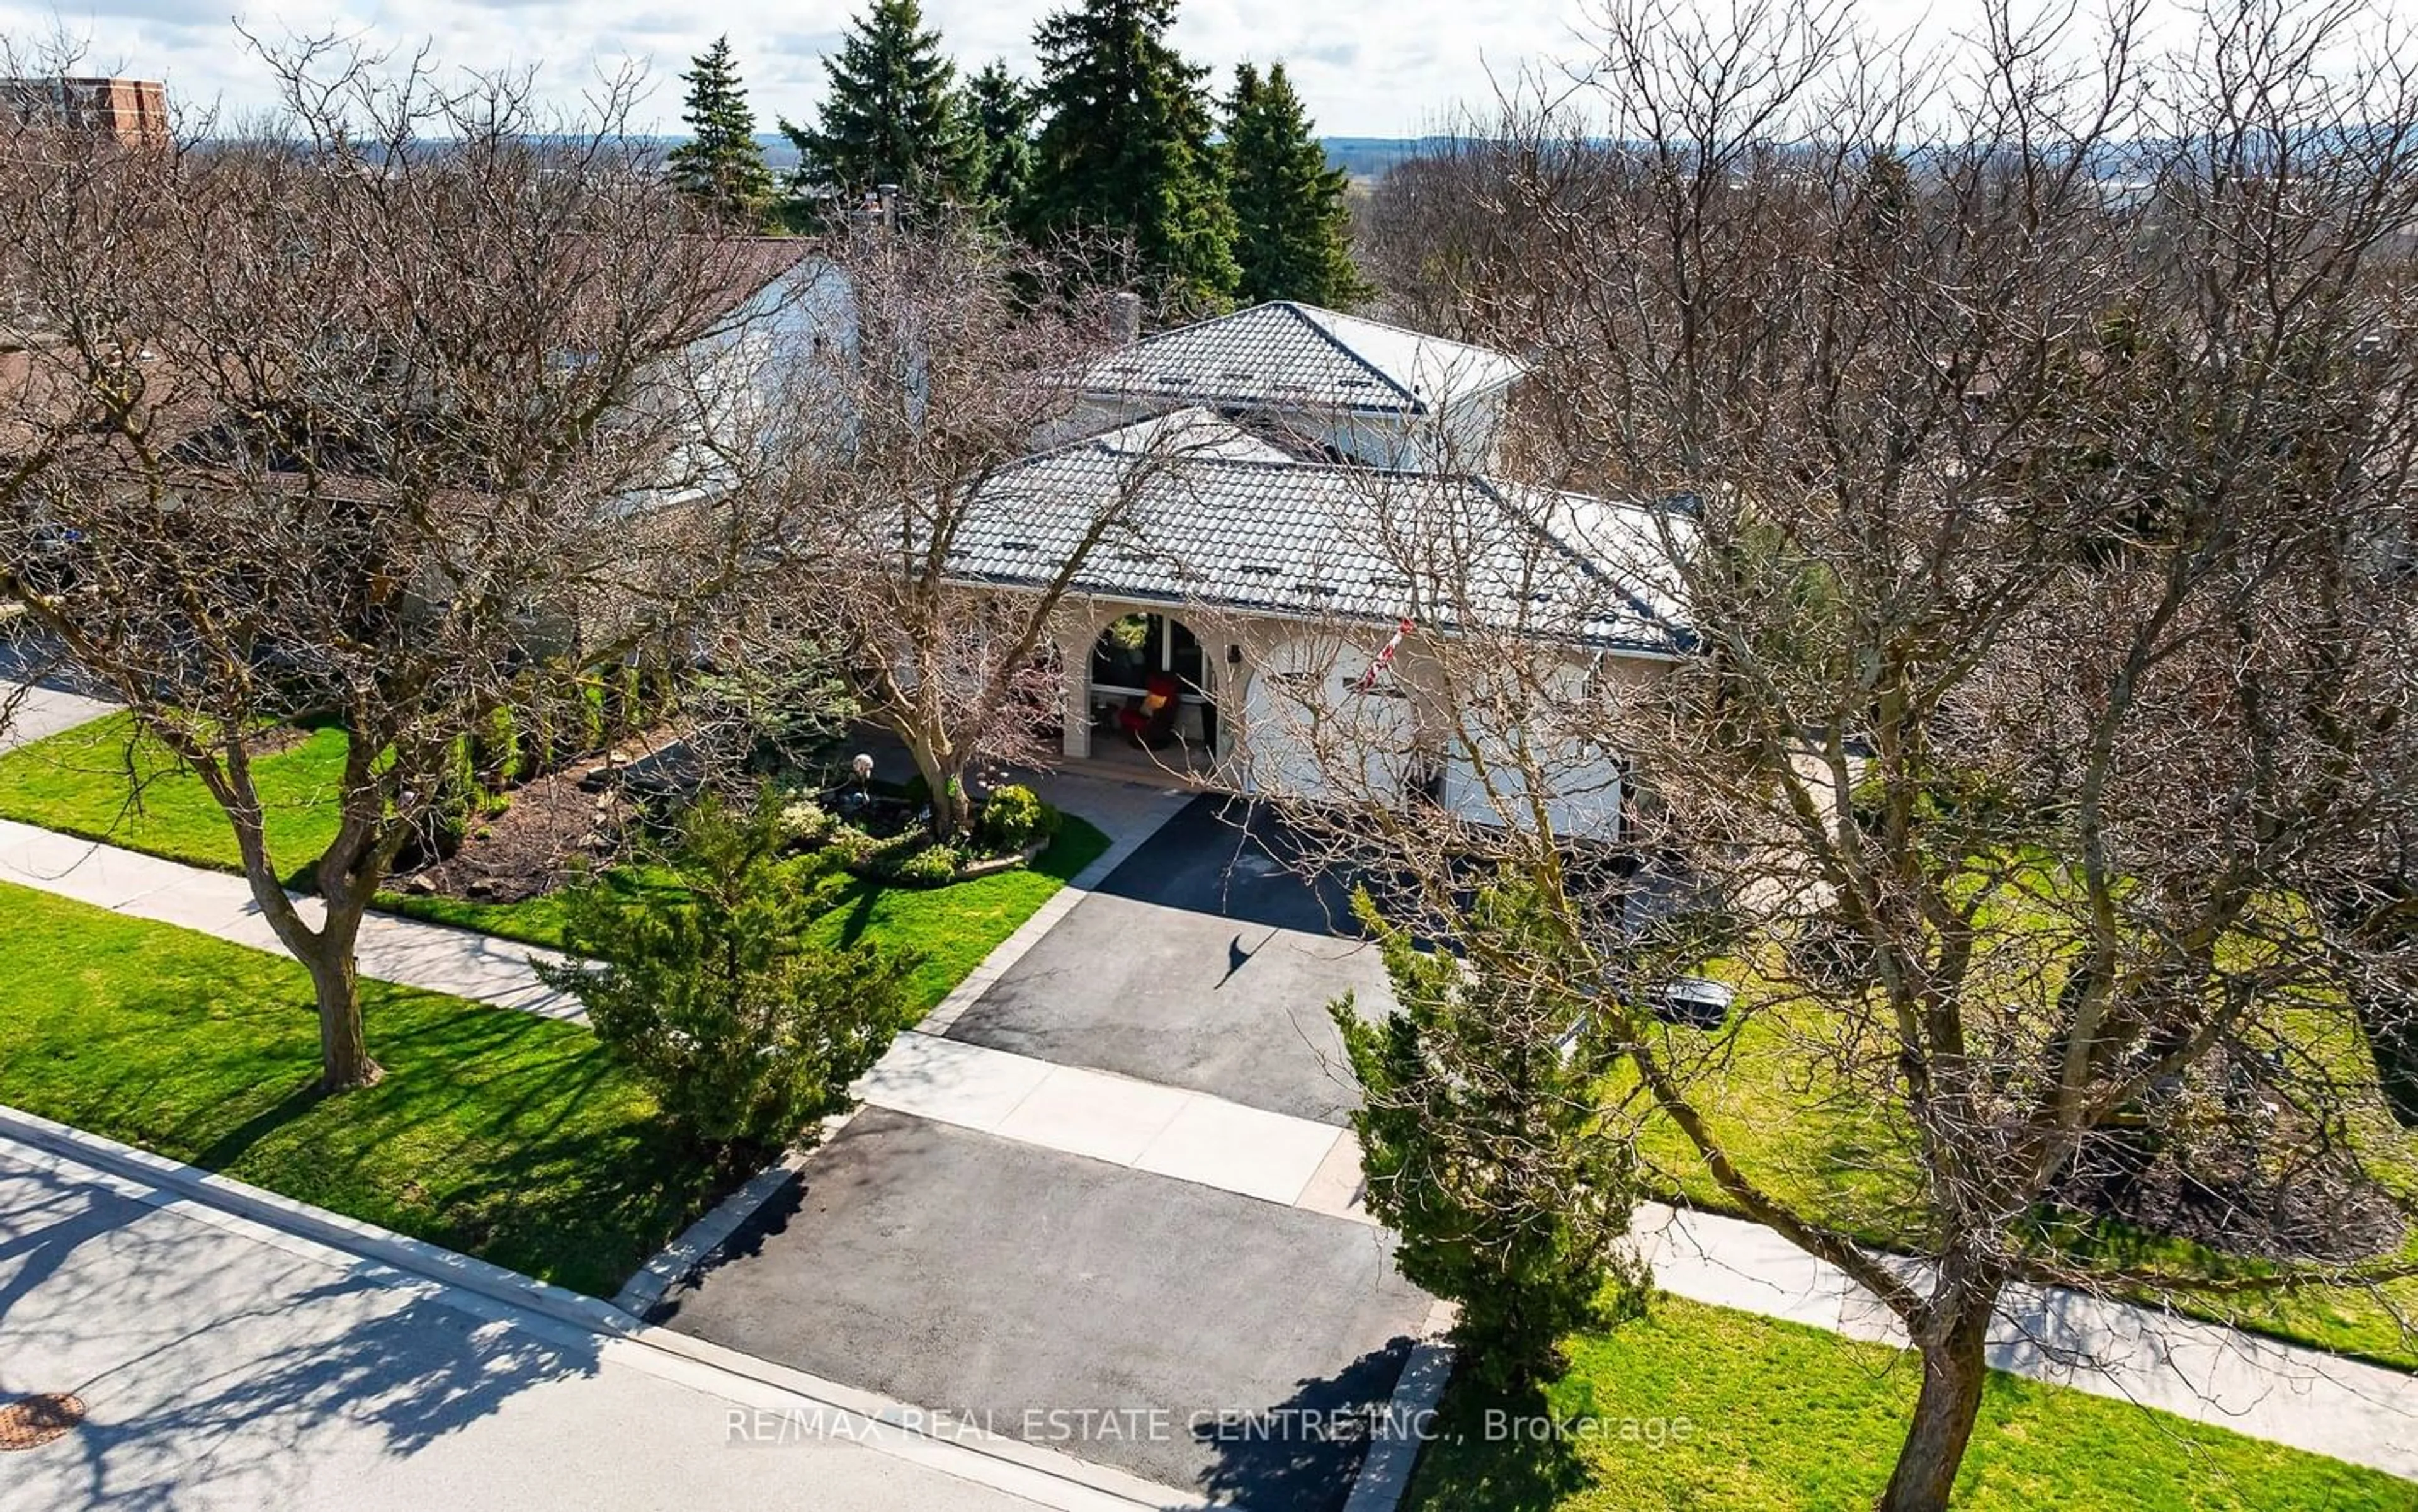 Outside view for 149 Valleyview Cres, Bradford West Gwillimbury Ontario L3Z 1S8